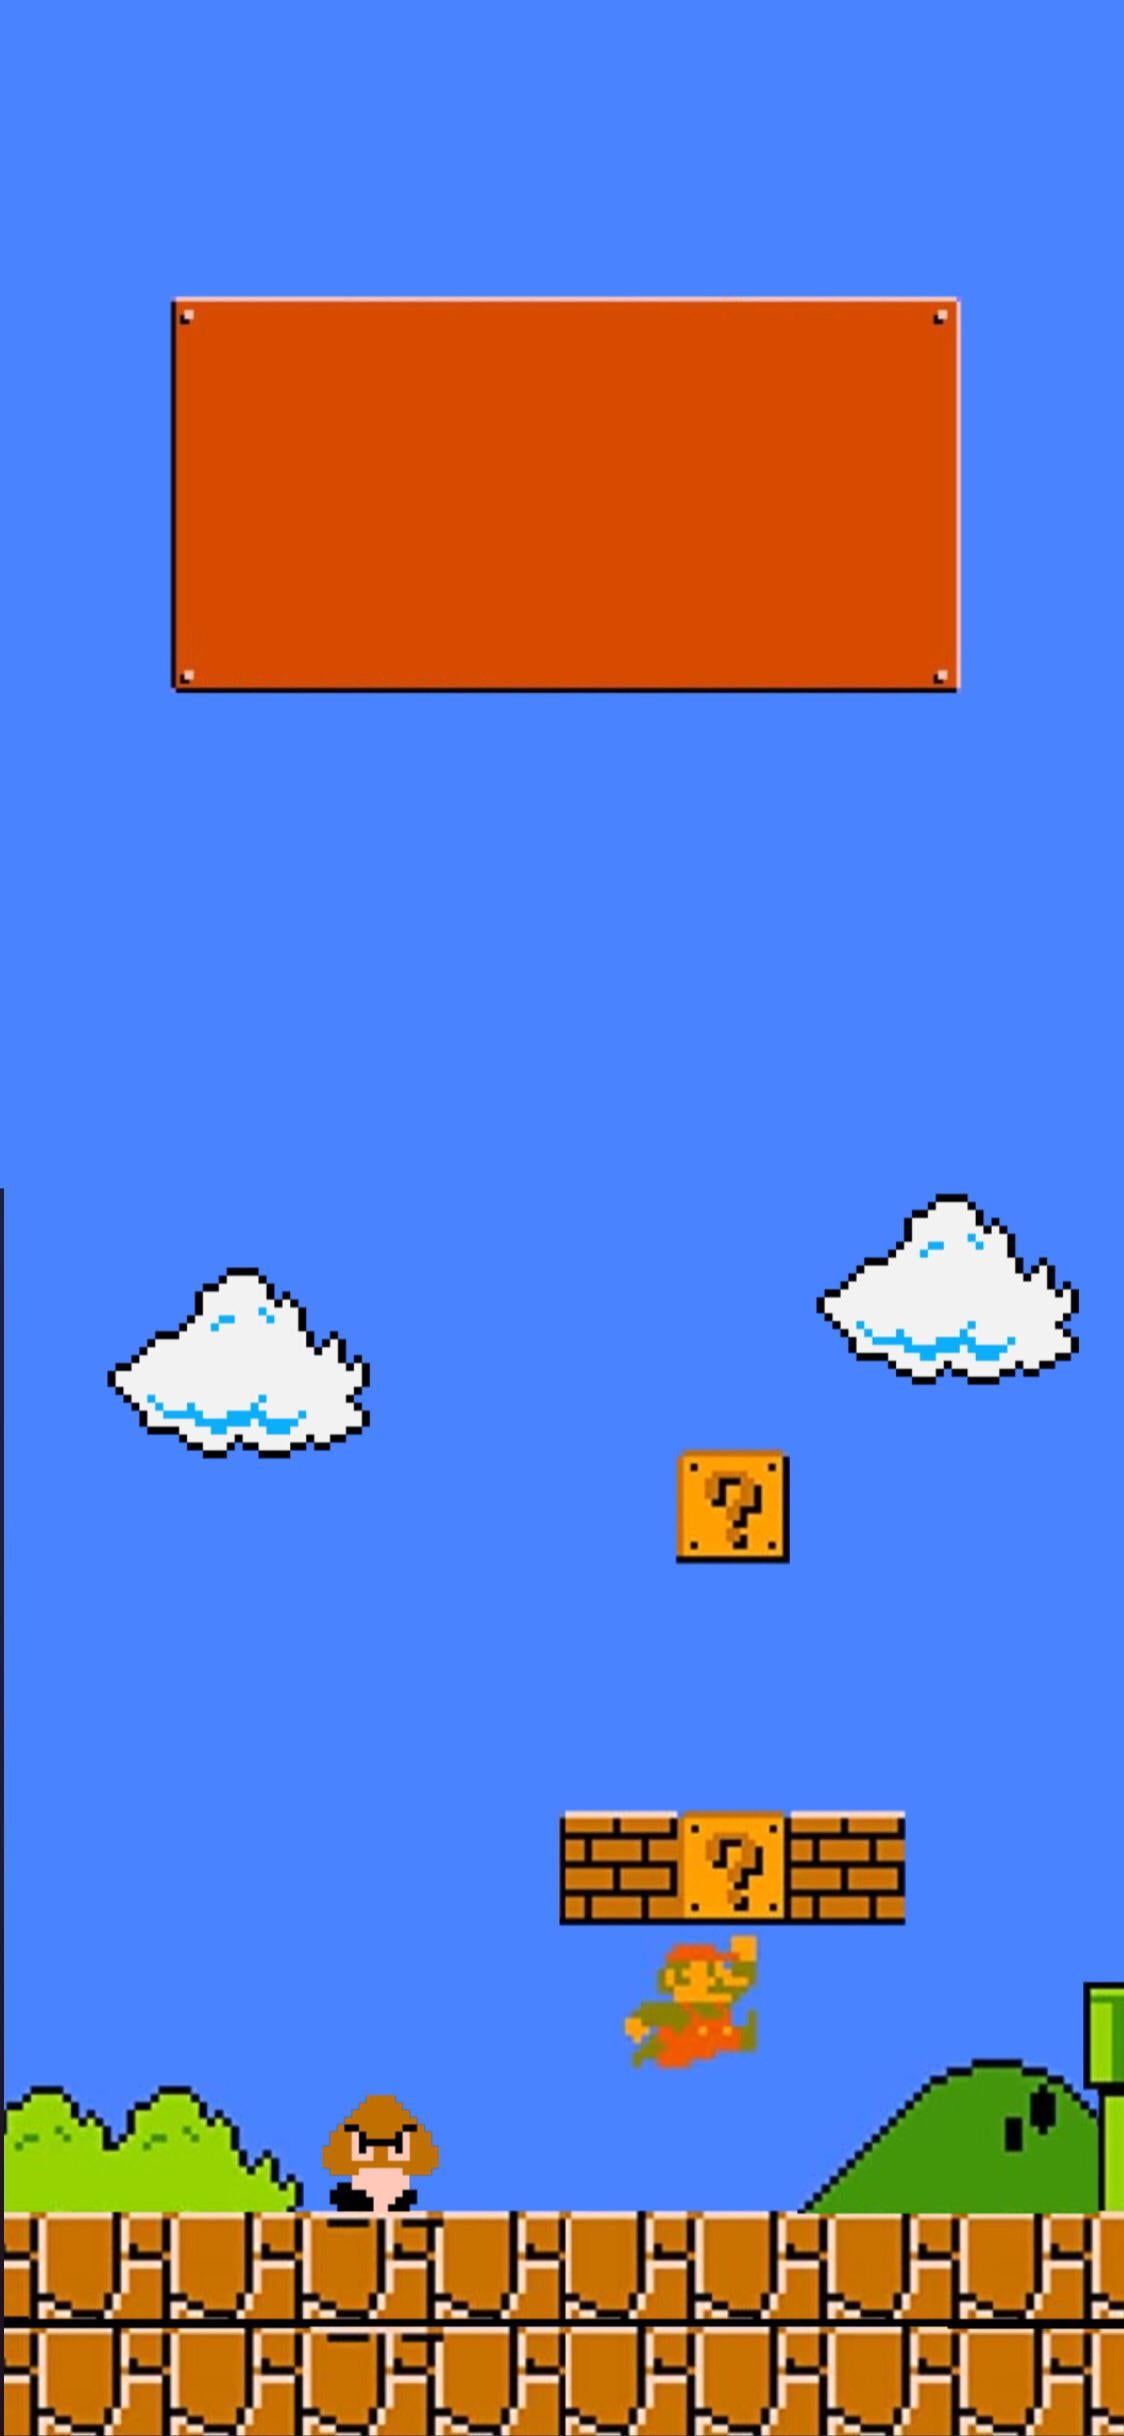 I created Super Mario Bros. IPhone Wallpaper (Turn Perspective View Off)